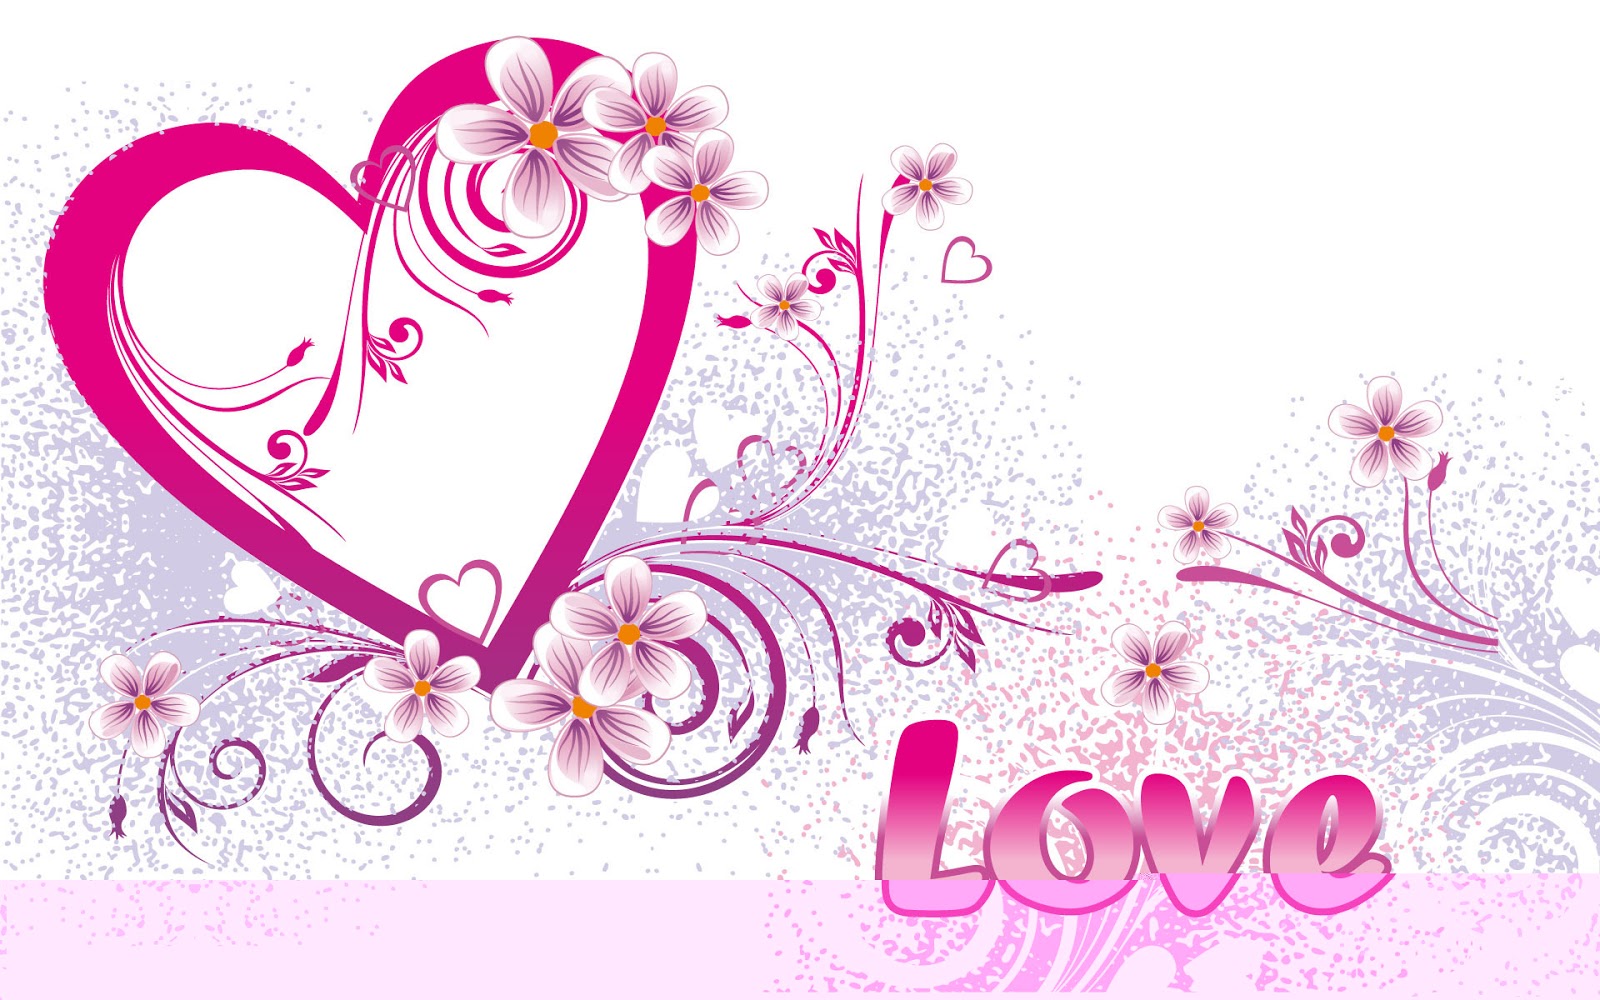  Backgrounds Cute Heart and Love Wallpapers with Different Backgrounds 1600x1000